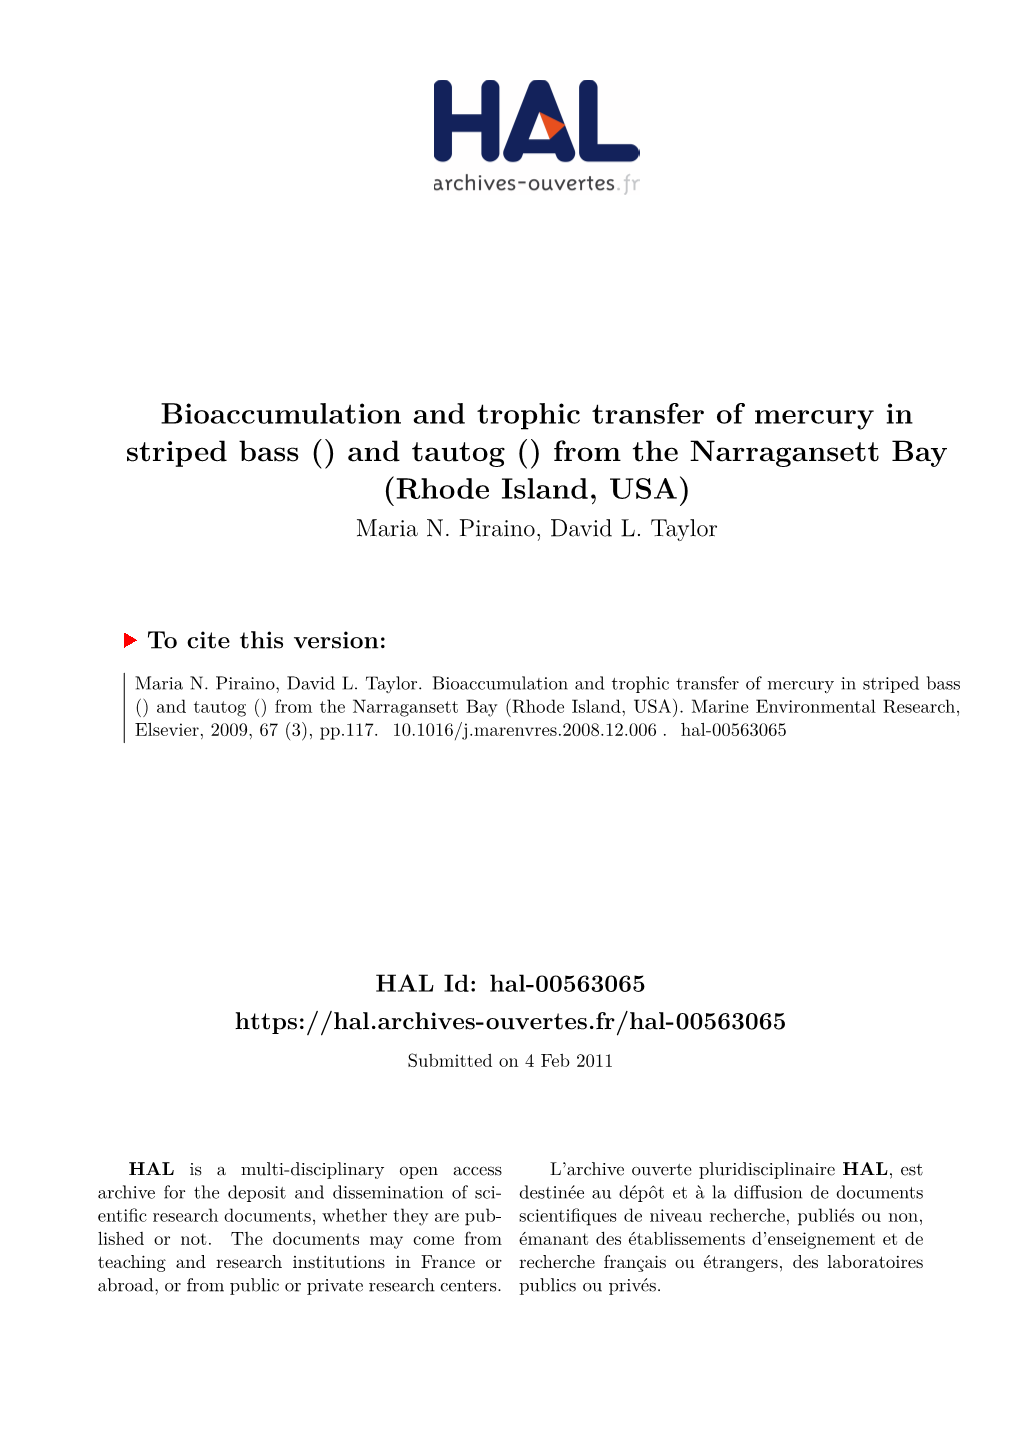 Bioaccumulation and Trophic Transfer of Mercury in Striped Bass () and Tautog () from the Narragansett Bay (Rhode Island, USA) Maria N